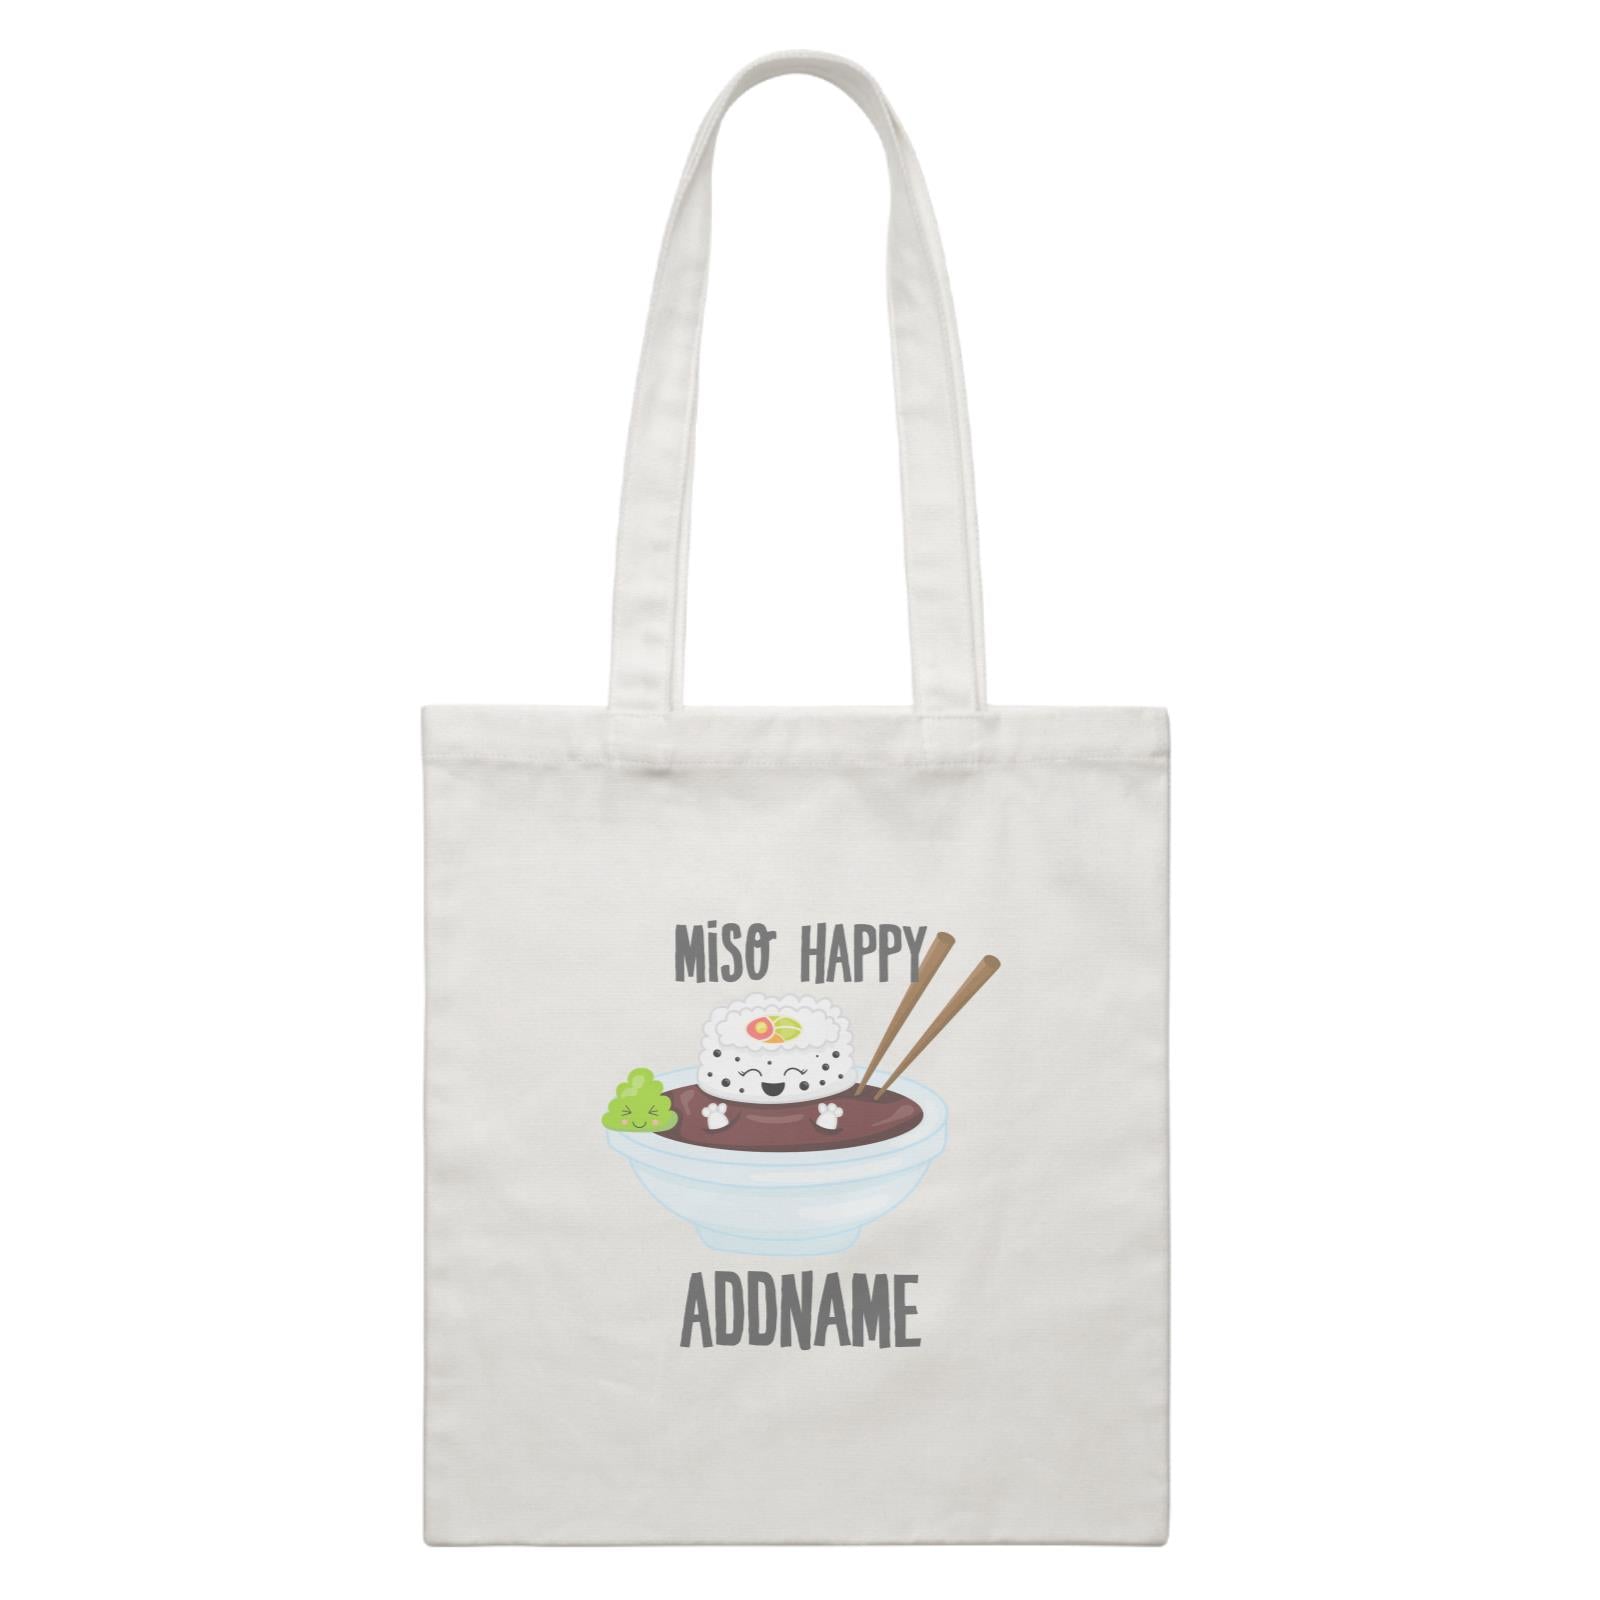 Miso Happy Sushi in Soy Sauce Addname White Canvas Bag